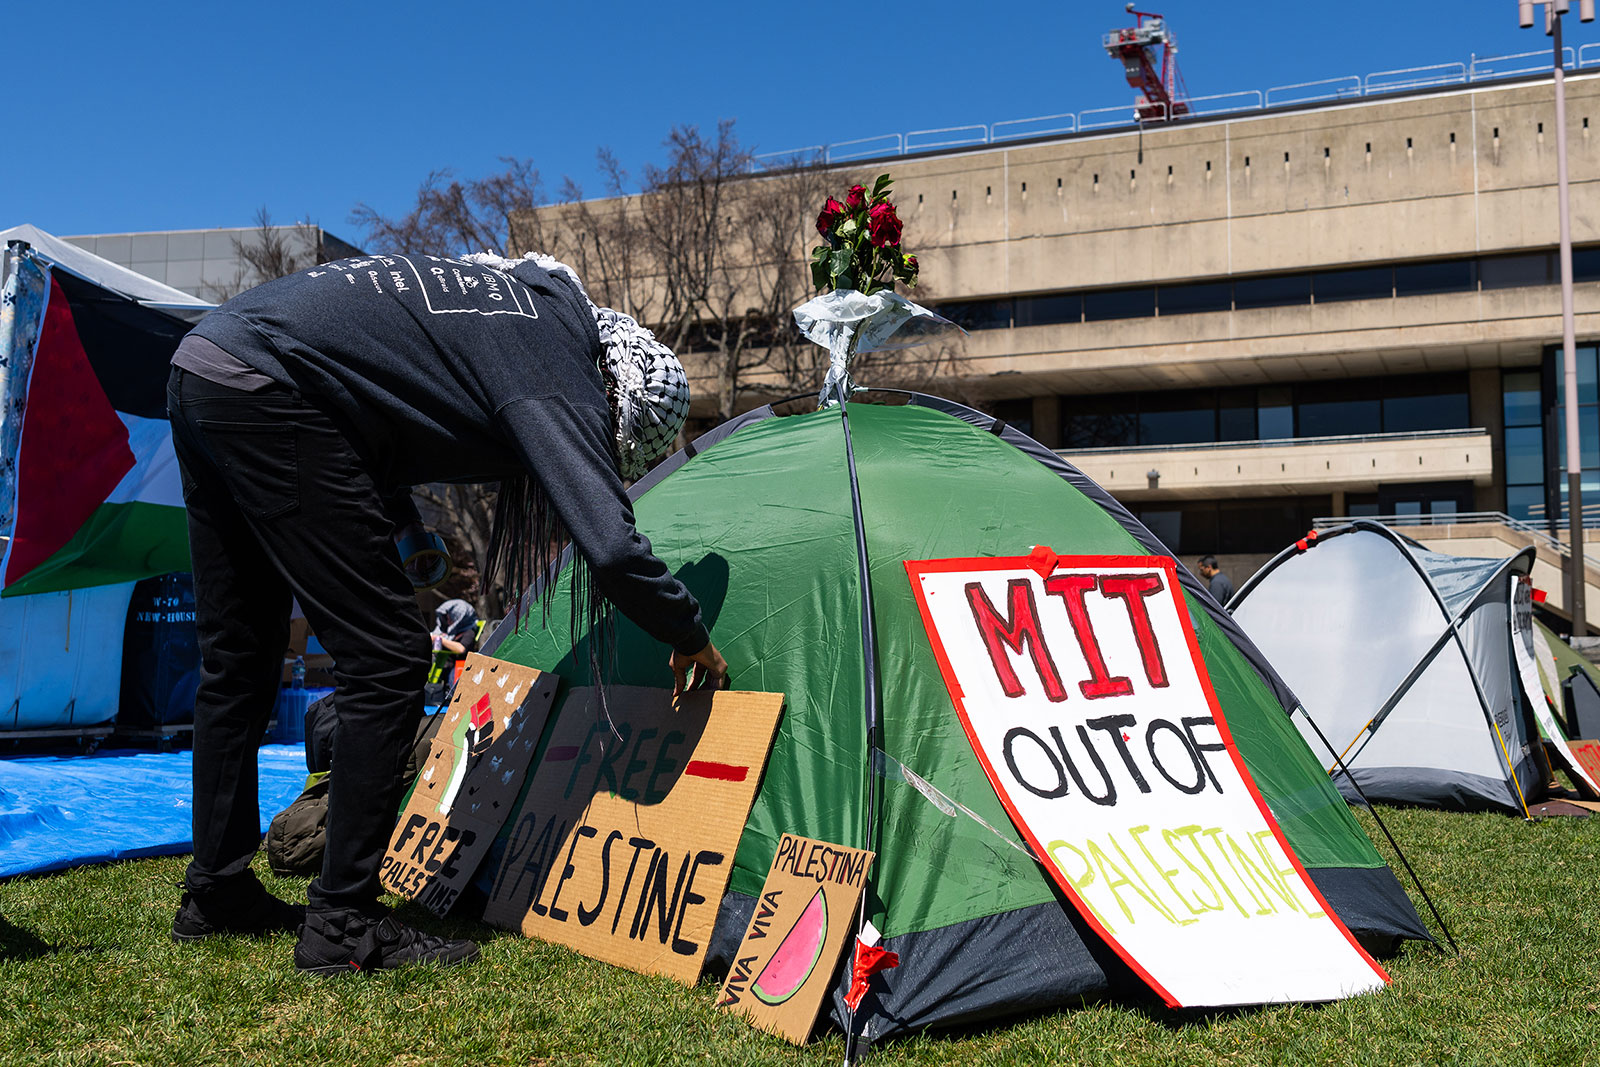 Demonstrators are seen at an encampment at the Massachusetts Institute of Technology in Cambridge on Tuesday.